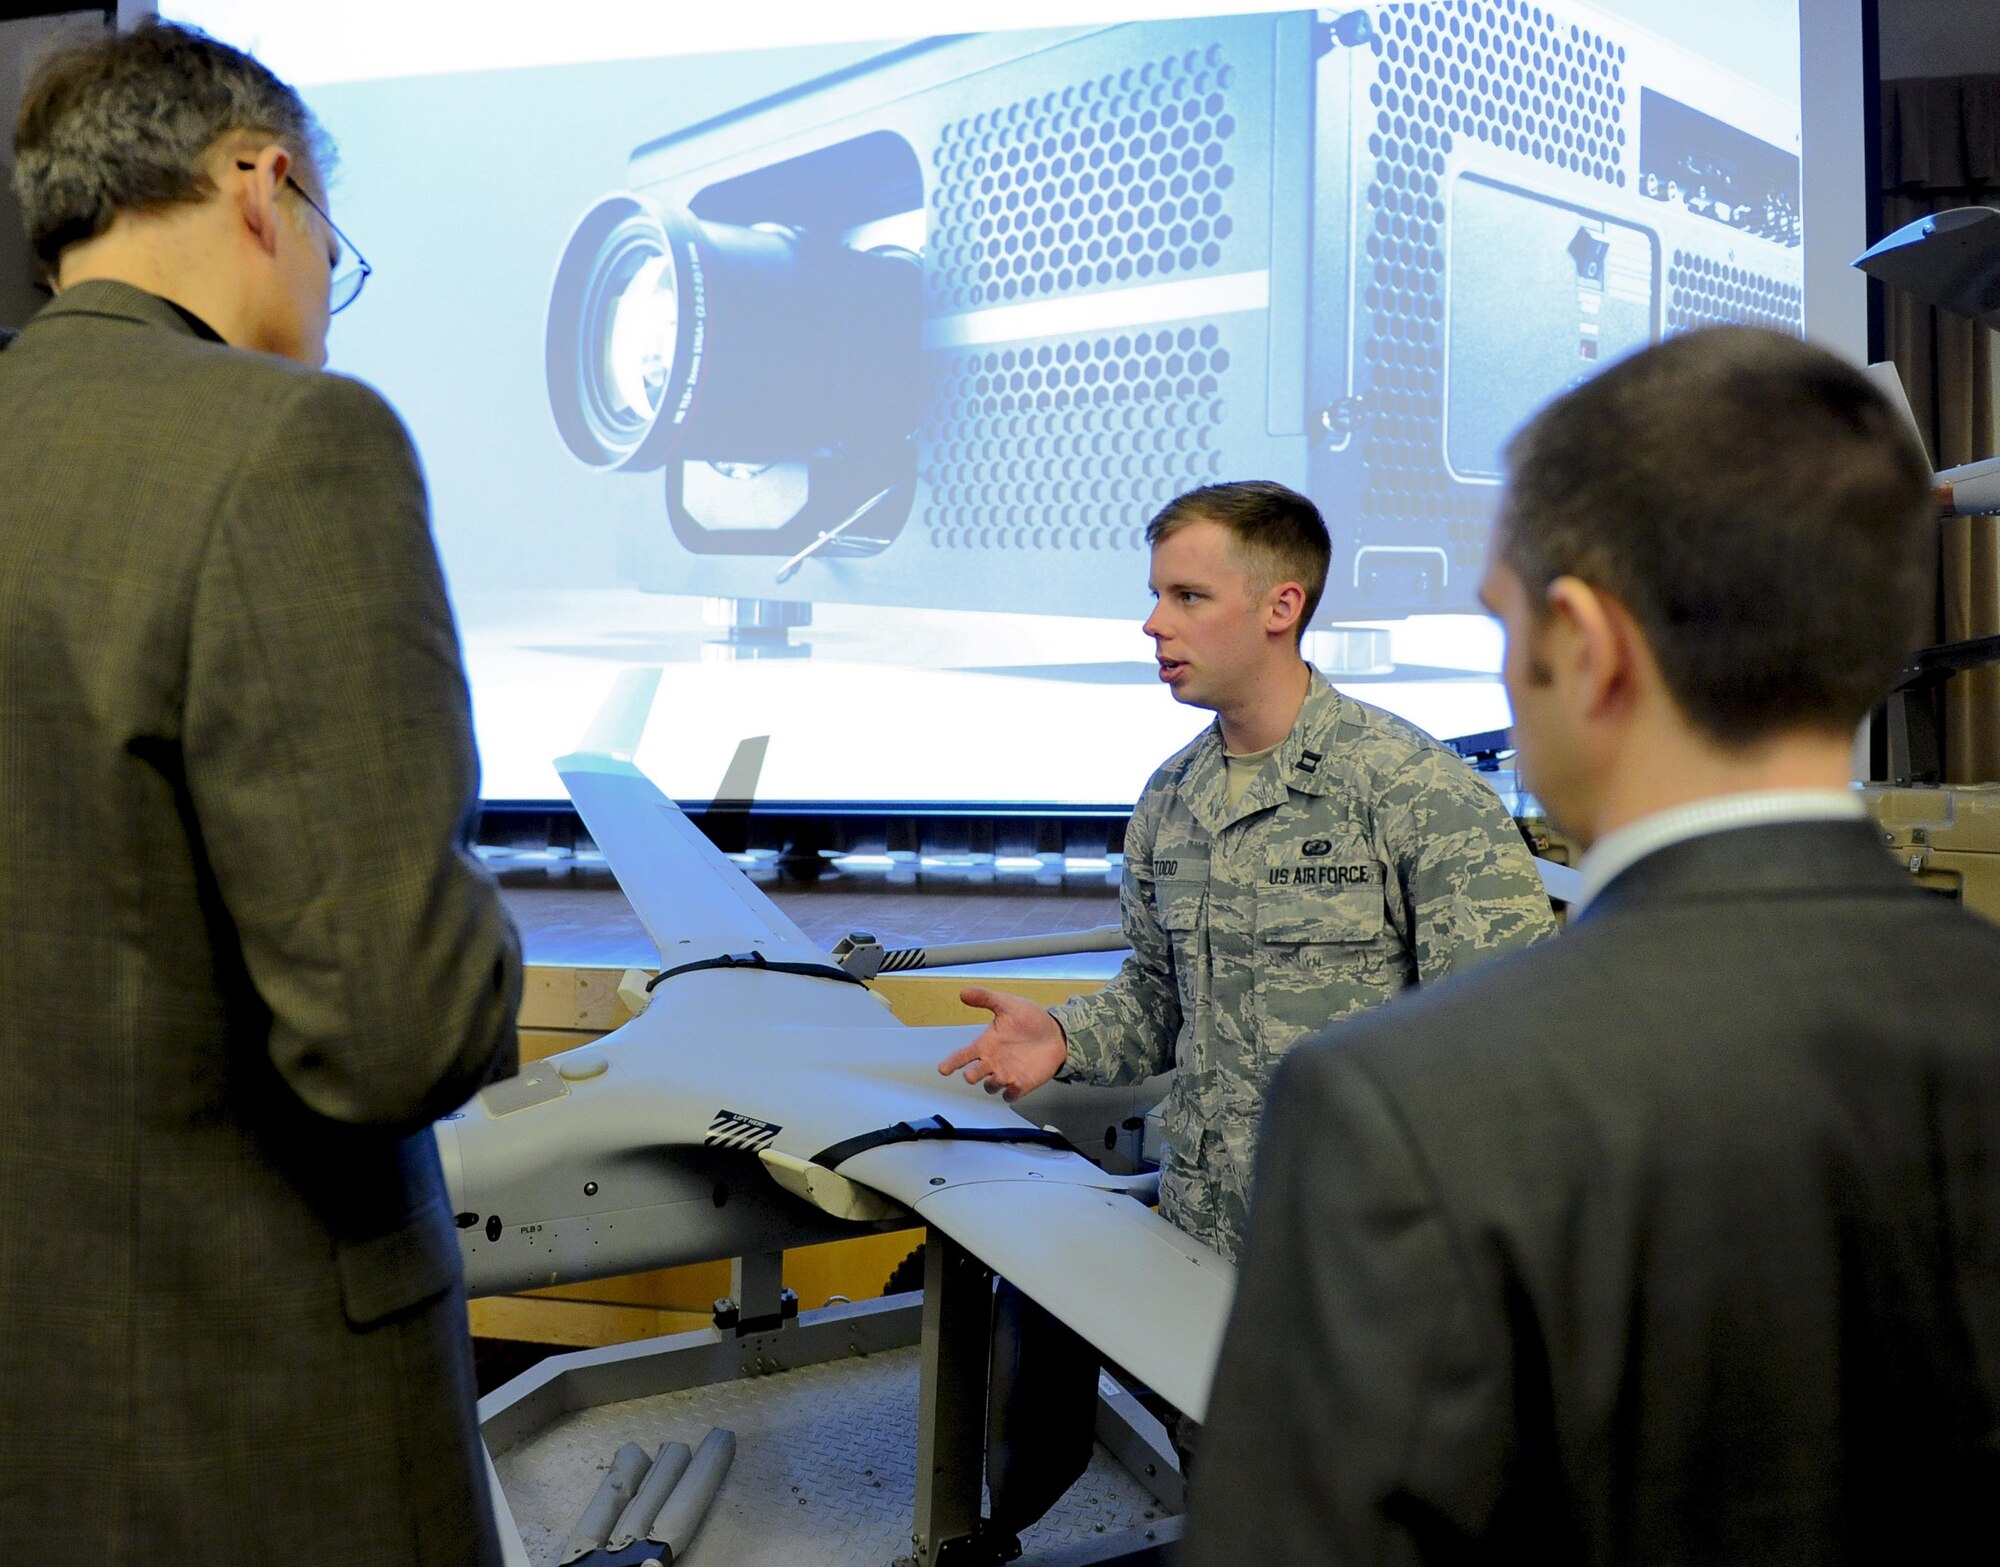 Capt. Lee M. Todd, an engineer at the Air Force Research Laboratory, briefs media during the release of the Small Unmanned Aircraft System Flight Plan at the Pentagon Conference Center May 17, 2016, in Washington, D.C. Integration of SUAS into operations across all domains and levels of warfare will increase the Air Force’s ability to meet emerging requirements of combatant commanders. (U.S. Air Force photo/Tech. Sgt. Anthony Nelson Jr.)